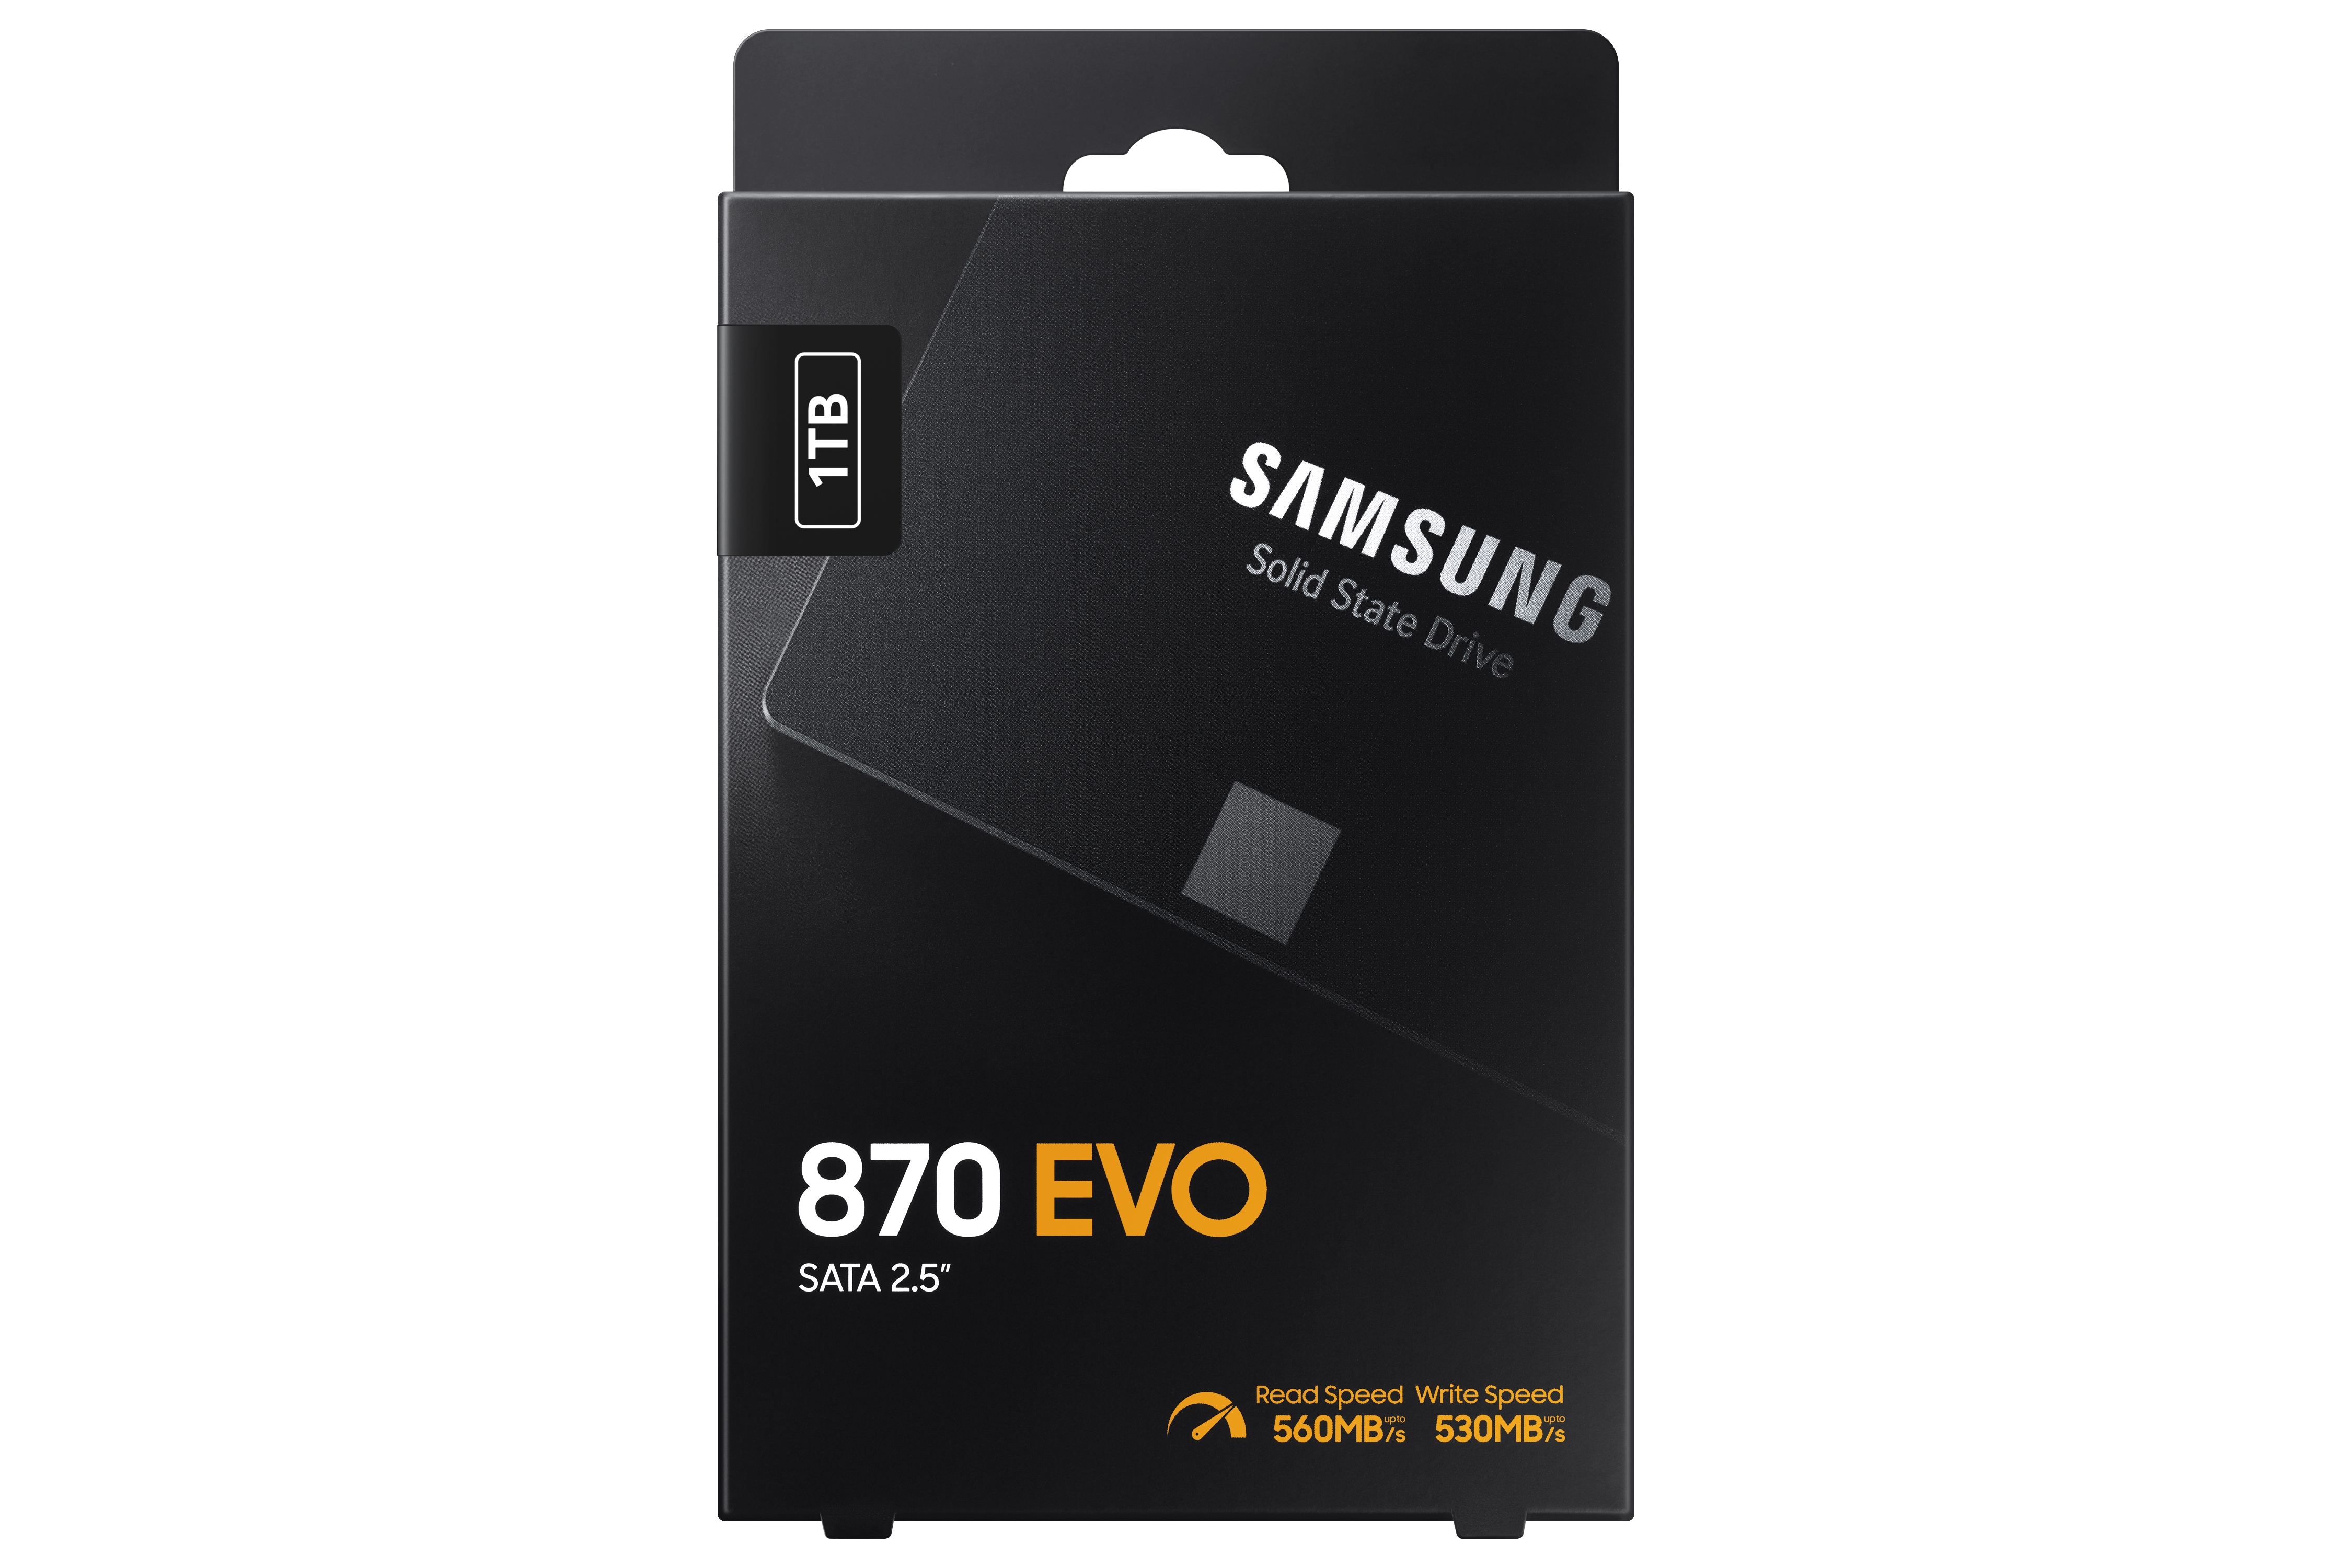 Synthetic Tests: Basic IO Patterns - The Samsung 870 EVO (1TB